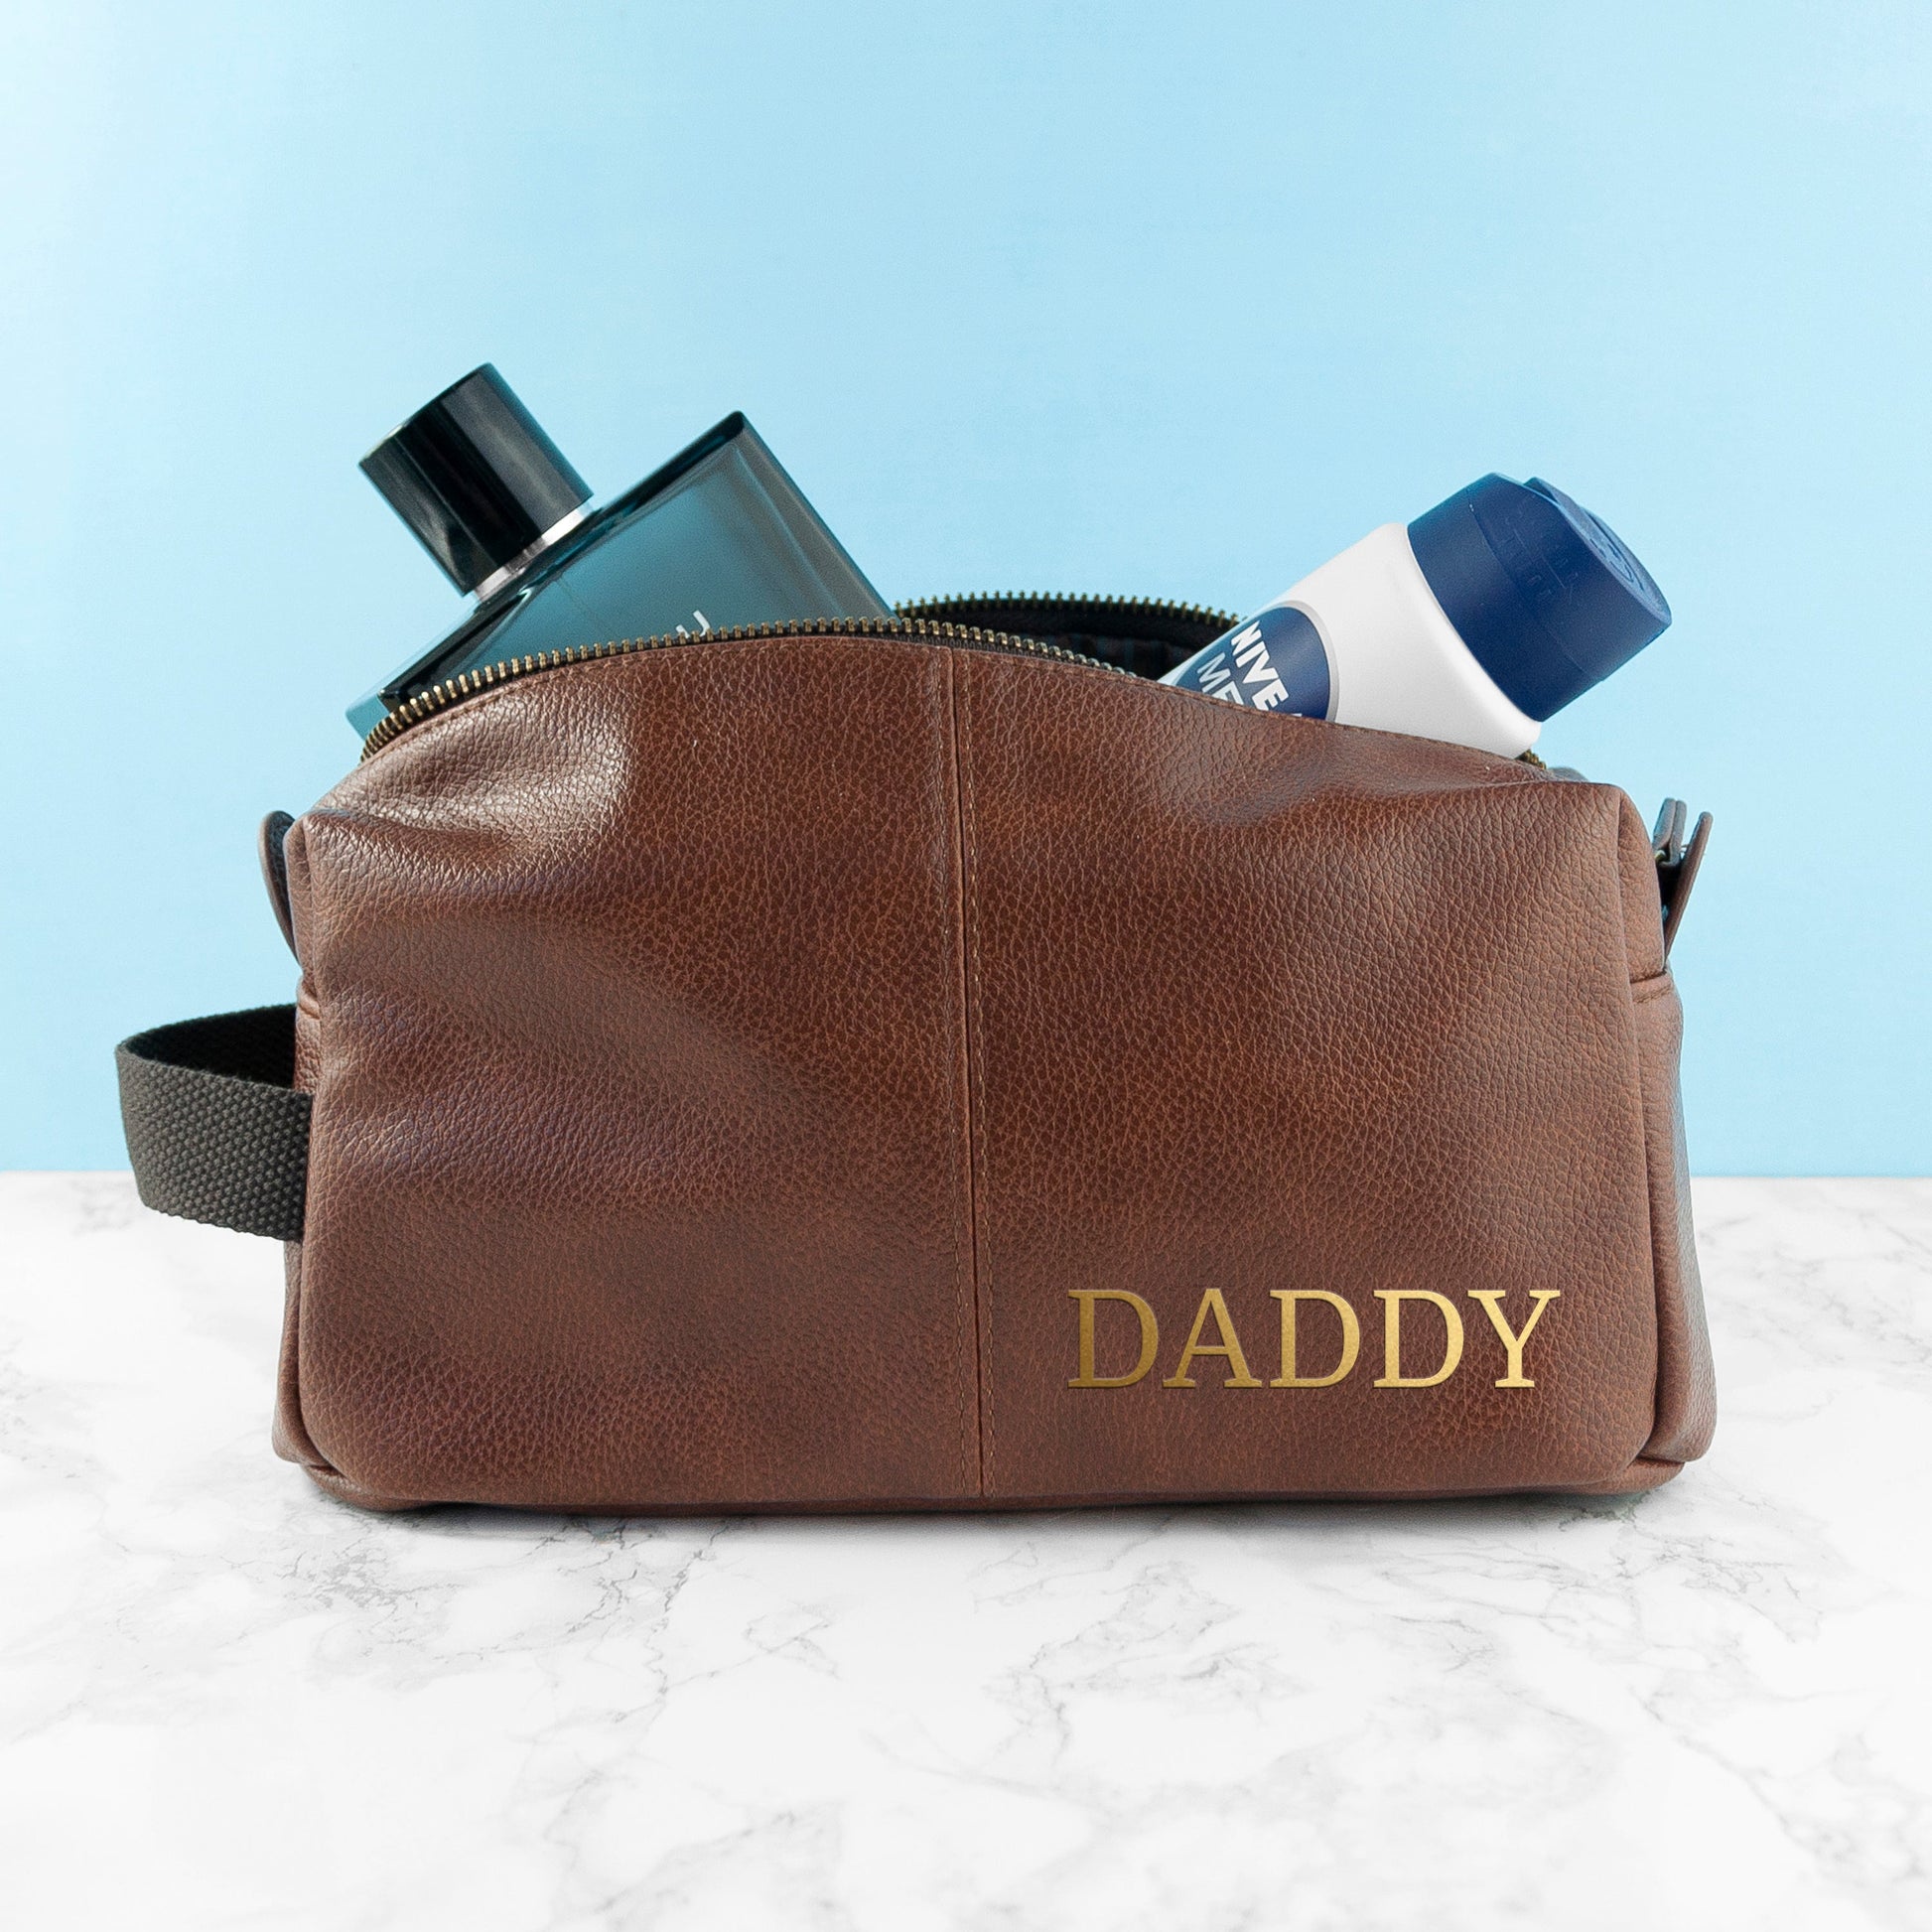 Personalized Men's Washbags - Personalized Dad's Vintage Style Wash Bag 